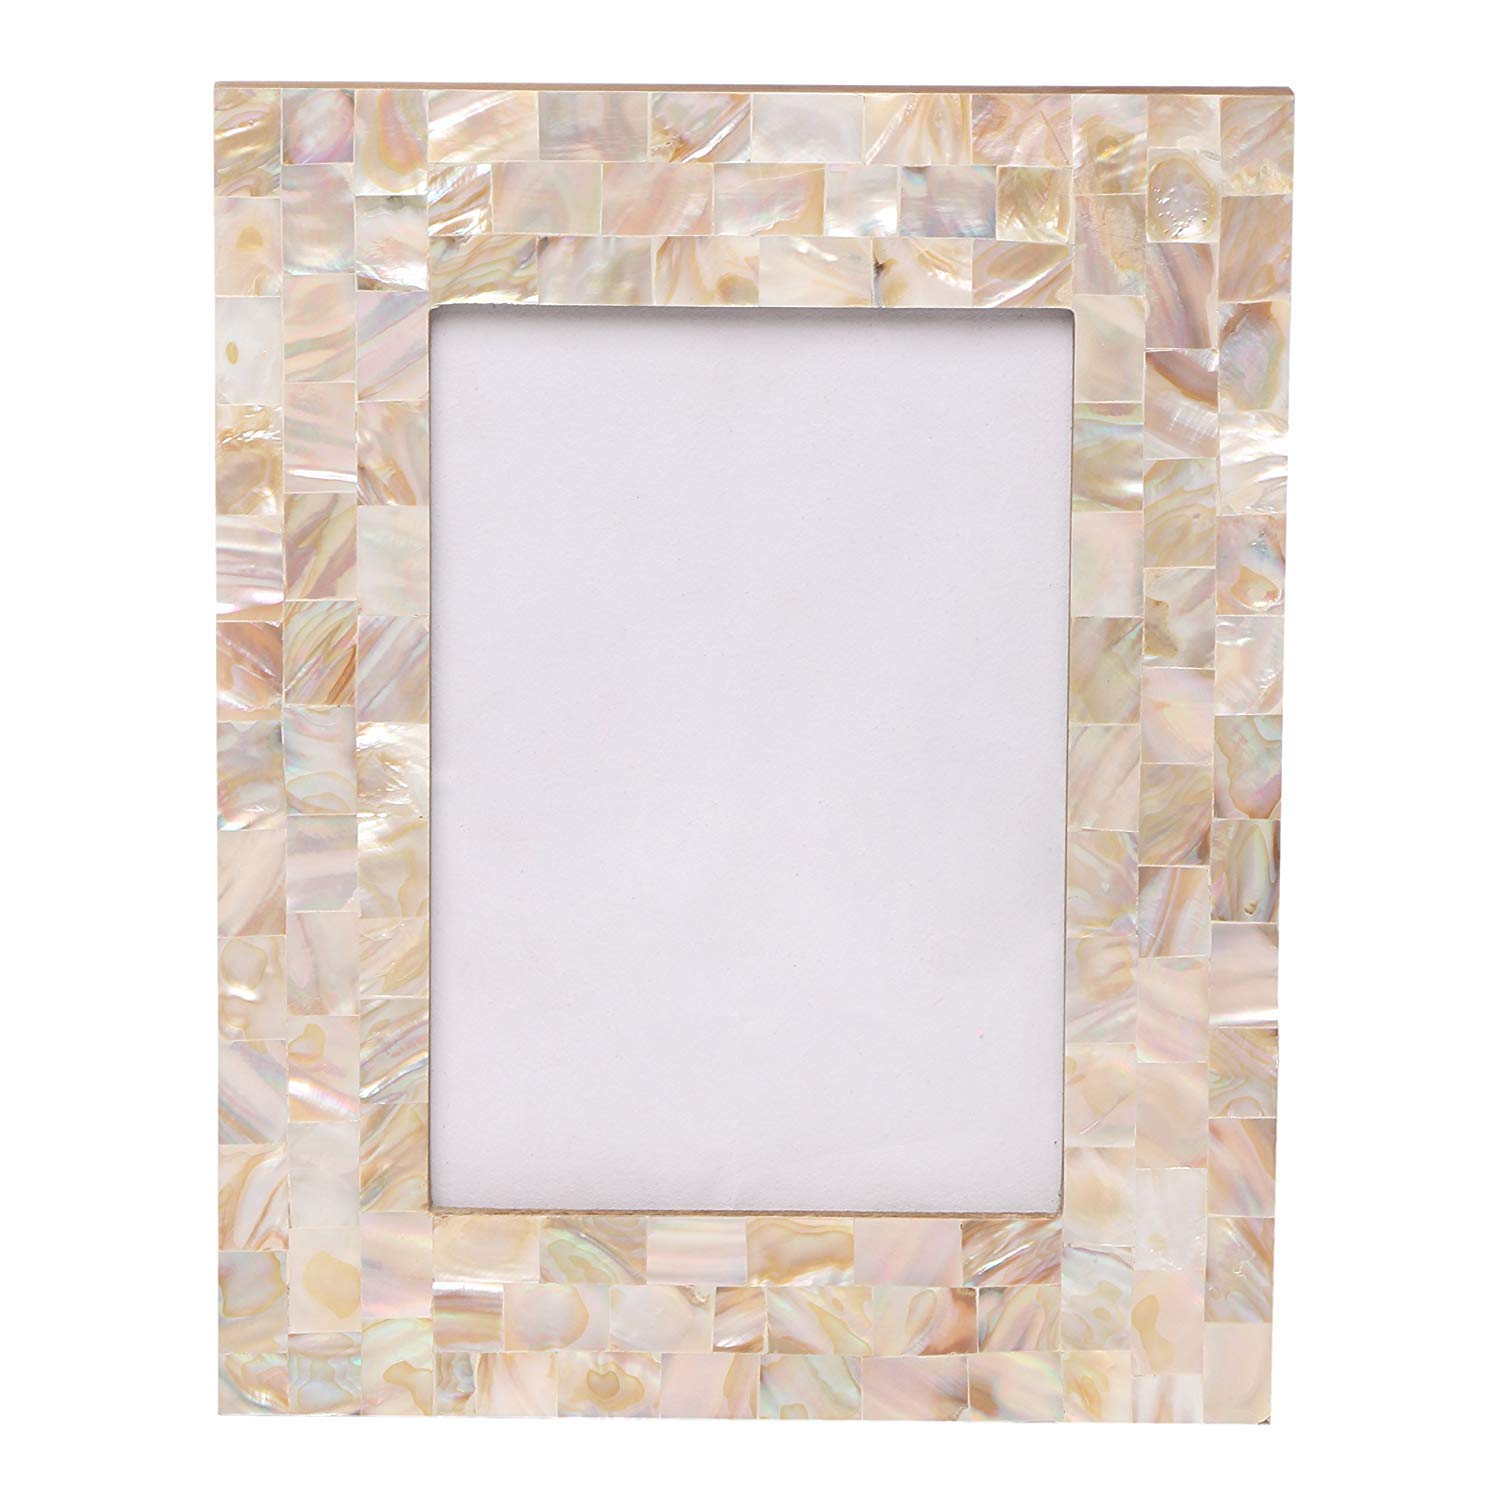 Handcrafted Mother of Pearl Table Photo Frame for Home Decor, Table Decor, Gifting Purpose (4x6 Inches Photo Size, White)